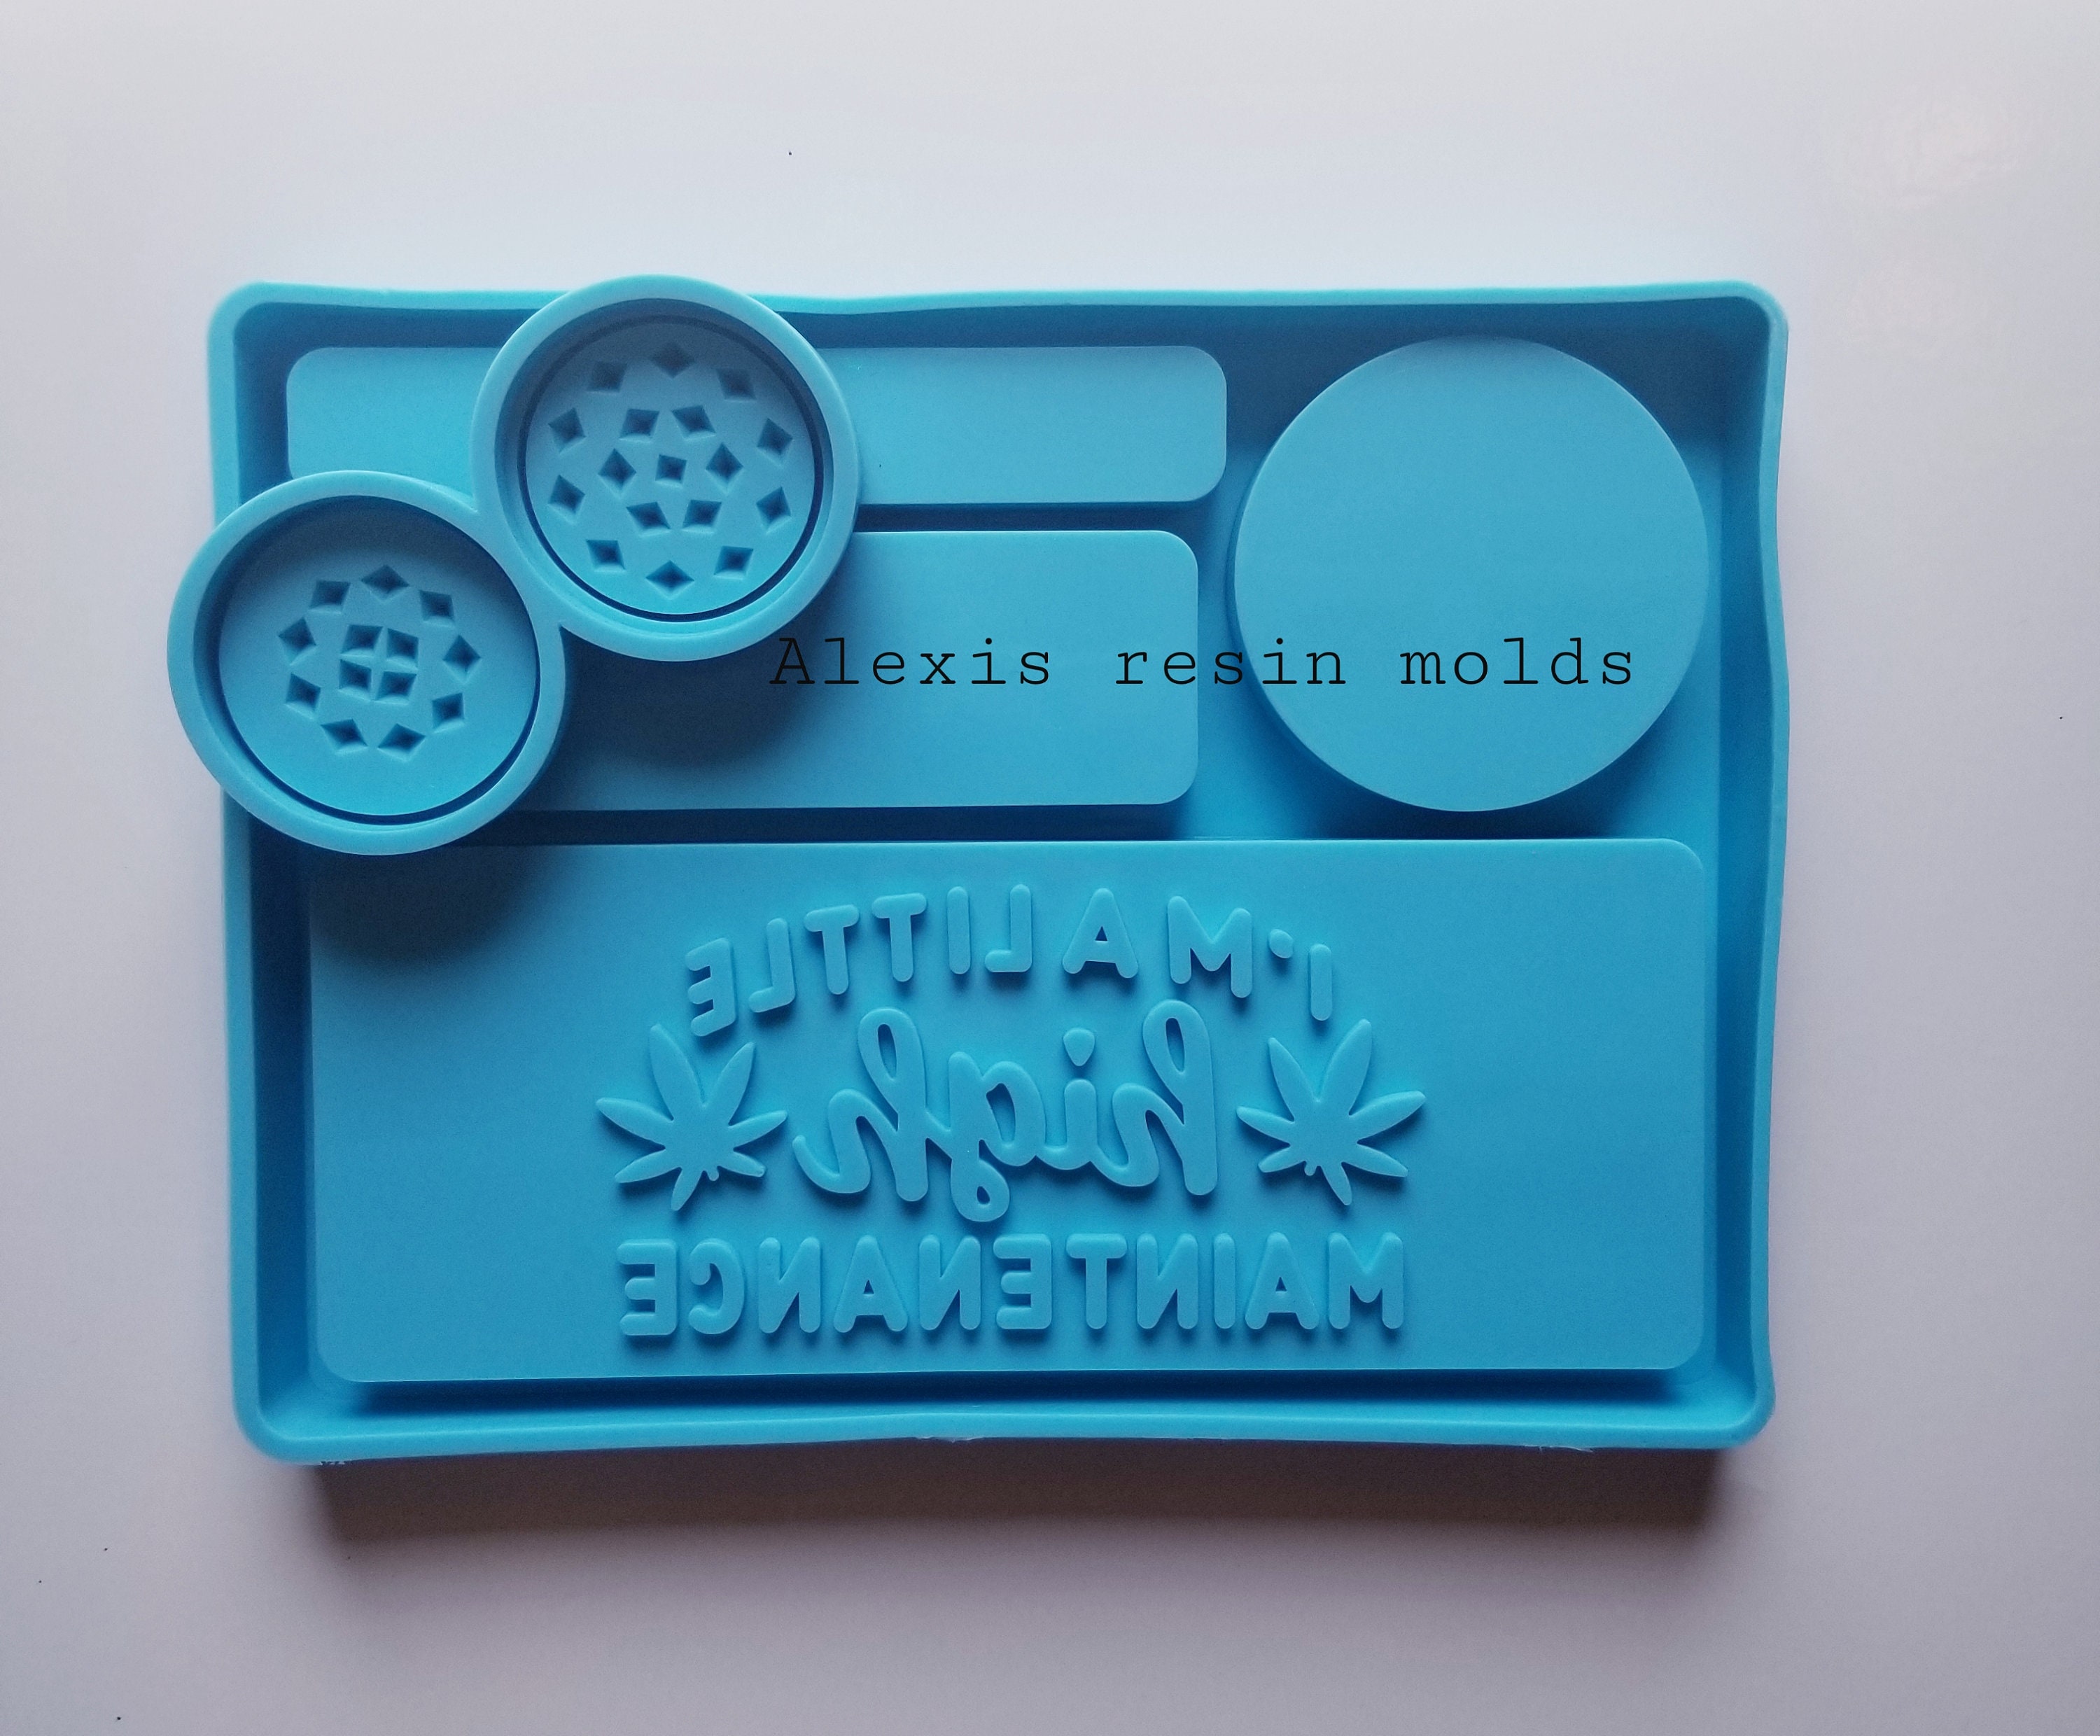 Small Silicone Rolling Tray - RP262